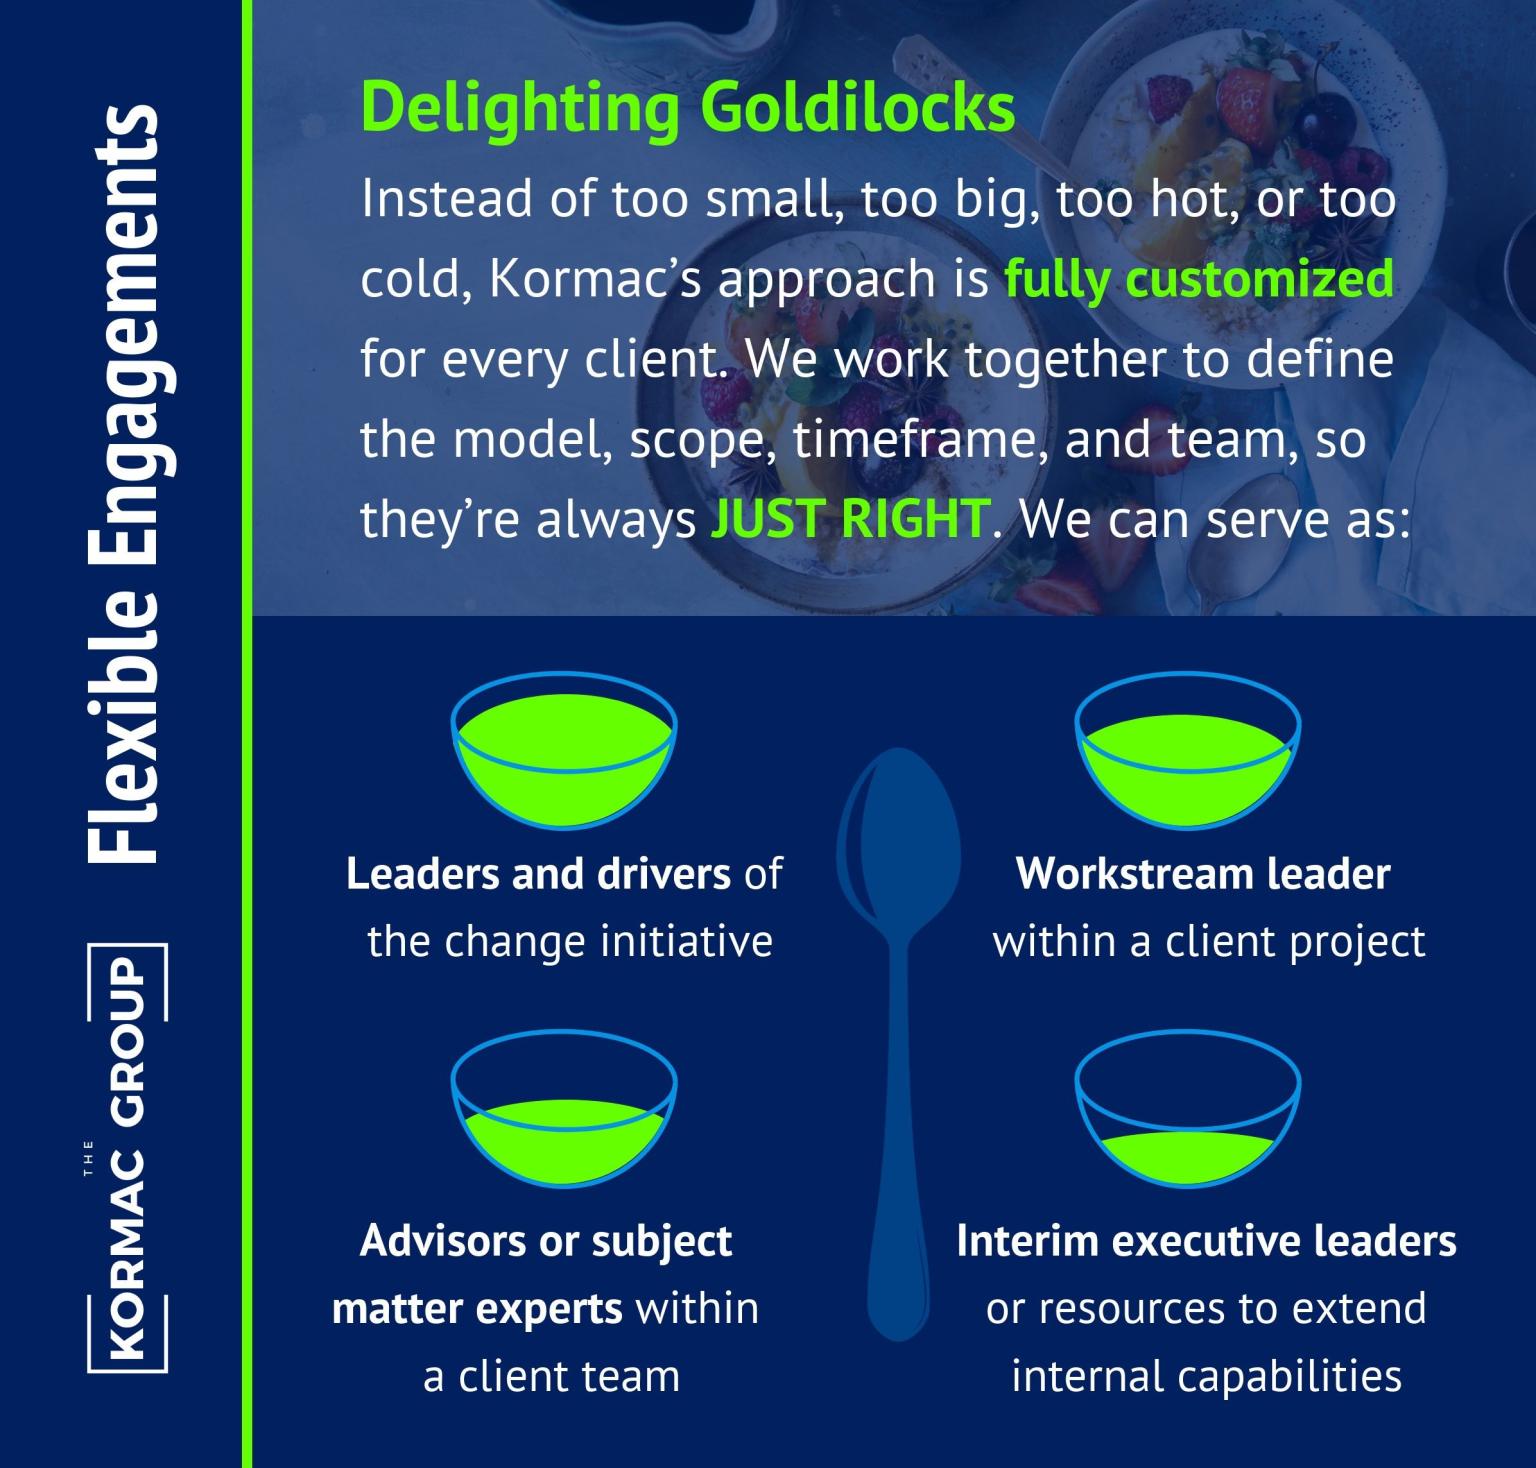 Flexible Engagements Delighting Goldilocks Instead of too small, too big, too hot, or too cold, Kormac's approach is fully customized for every client. We work together to define the model, scope, timeframe, and team, so they're always JUST RIGHT. We can serve as: - Leaders and drivers of the change initiative - workstream leader within a client project - advisors or subject matter experts within a client team - interim executive leaders or resources to extend internal capabilities